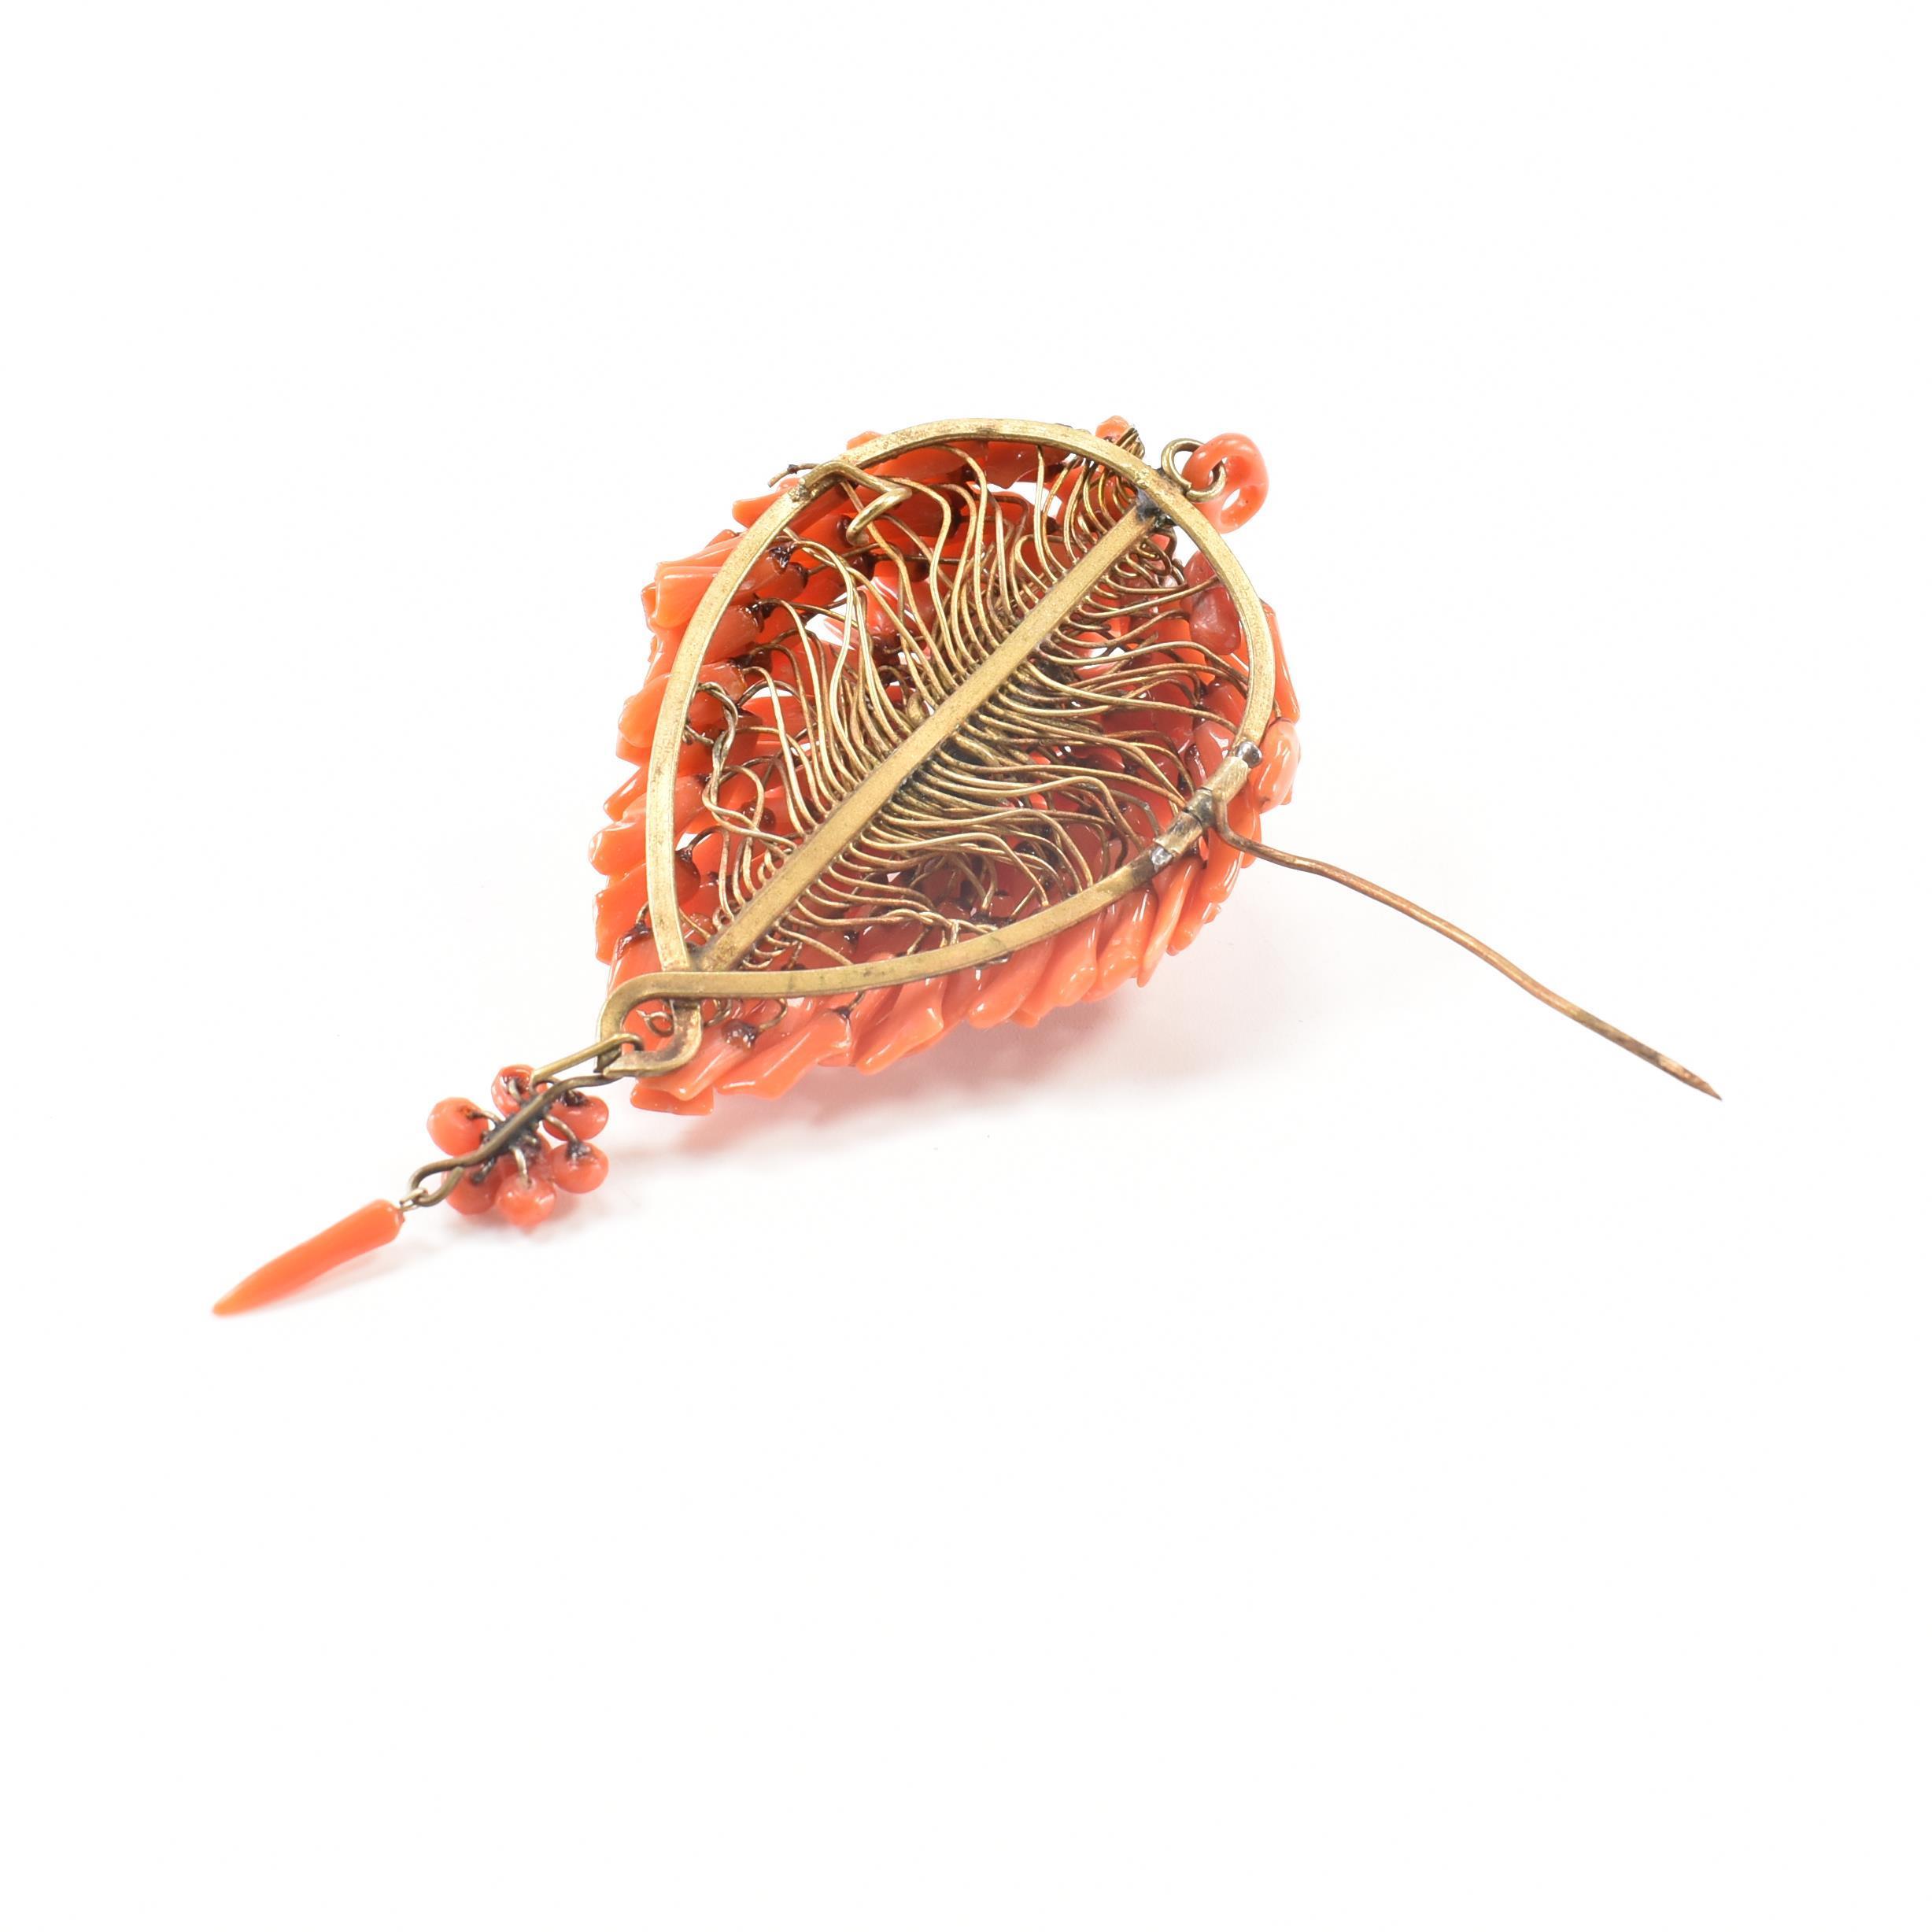 VICTORIAN GILT METAL & CORAL BROOCH - Image 6 of 6